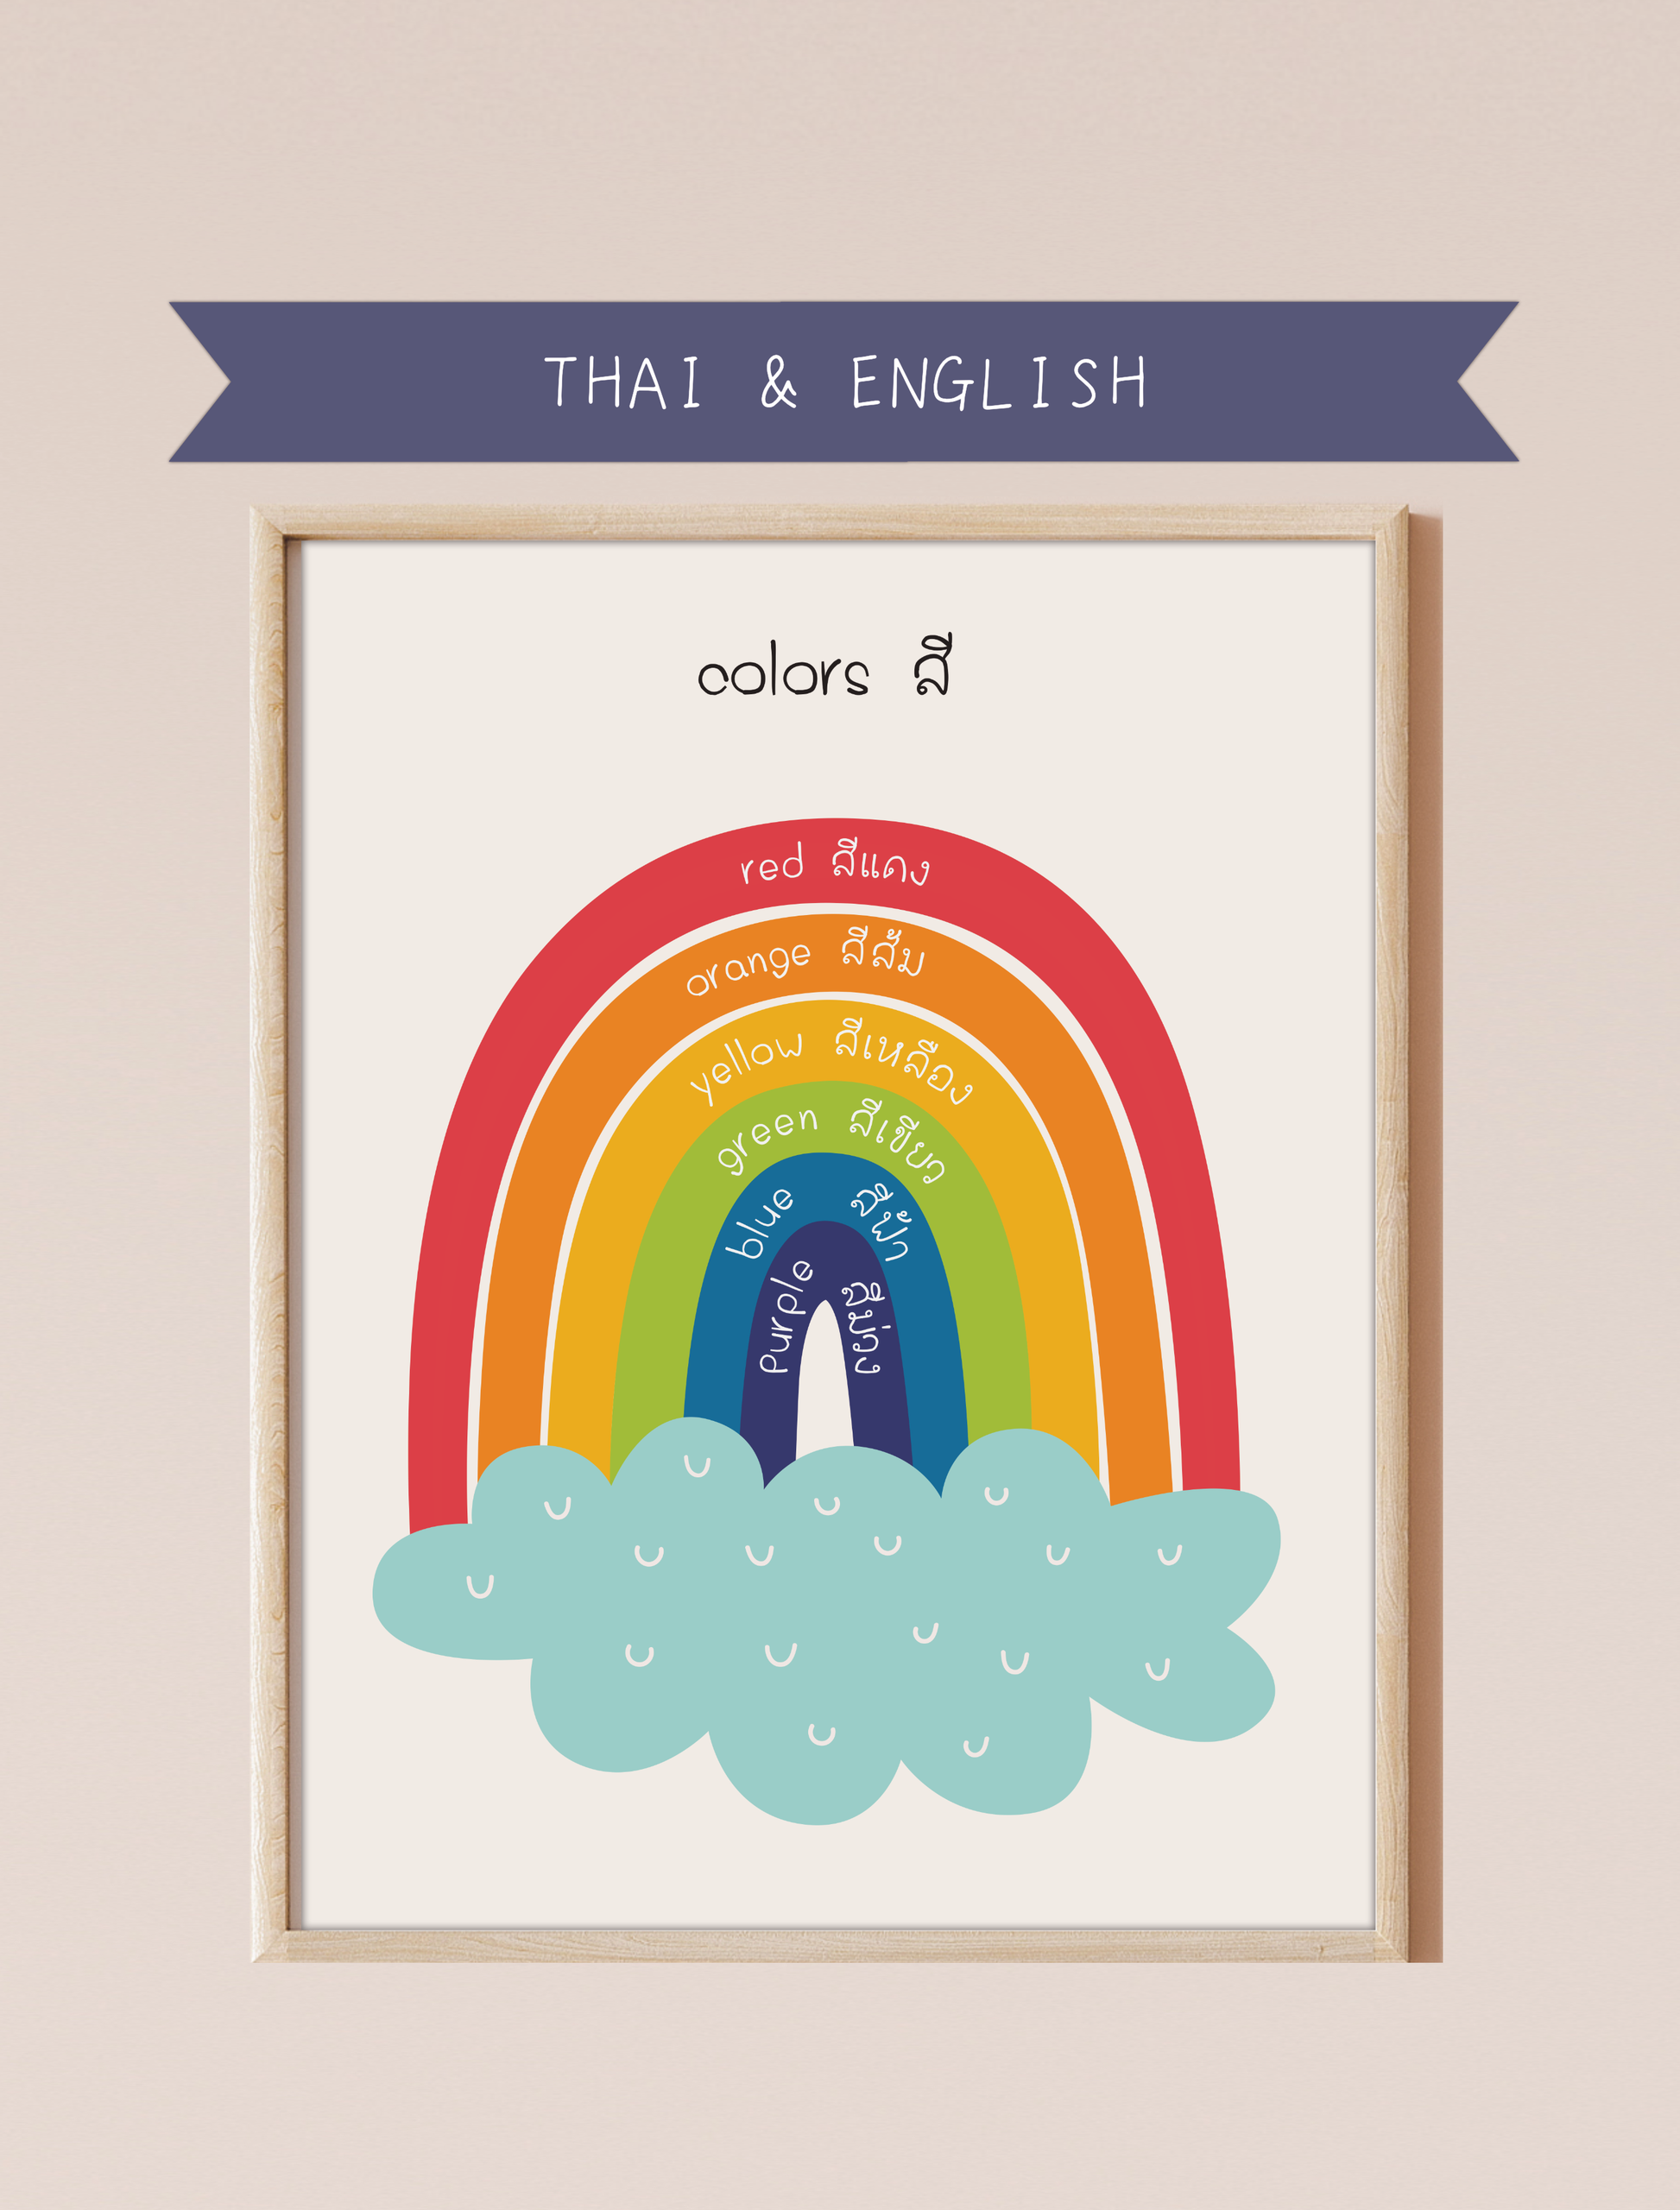 A bilingual educational print featuring colors labeled in English and Thai. The print displays cute, colorful rainbow featuring the following colors: red, orange, yellow, green, blue and purple . This bilingual display aids in language acquisition and cross-cultural learning and has a perfect aesthetic for a baby nursery, classroom, or other decor. 